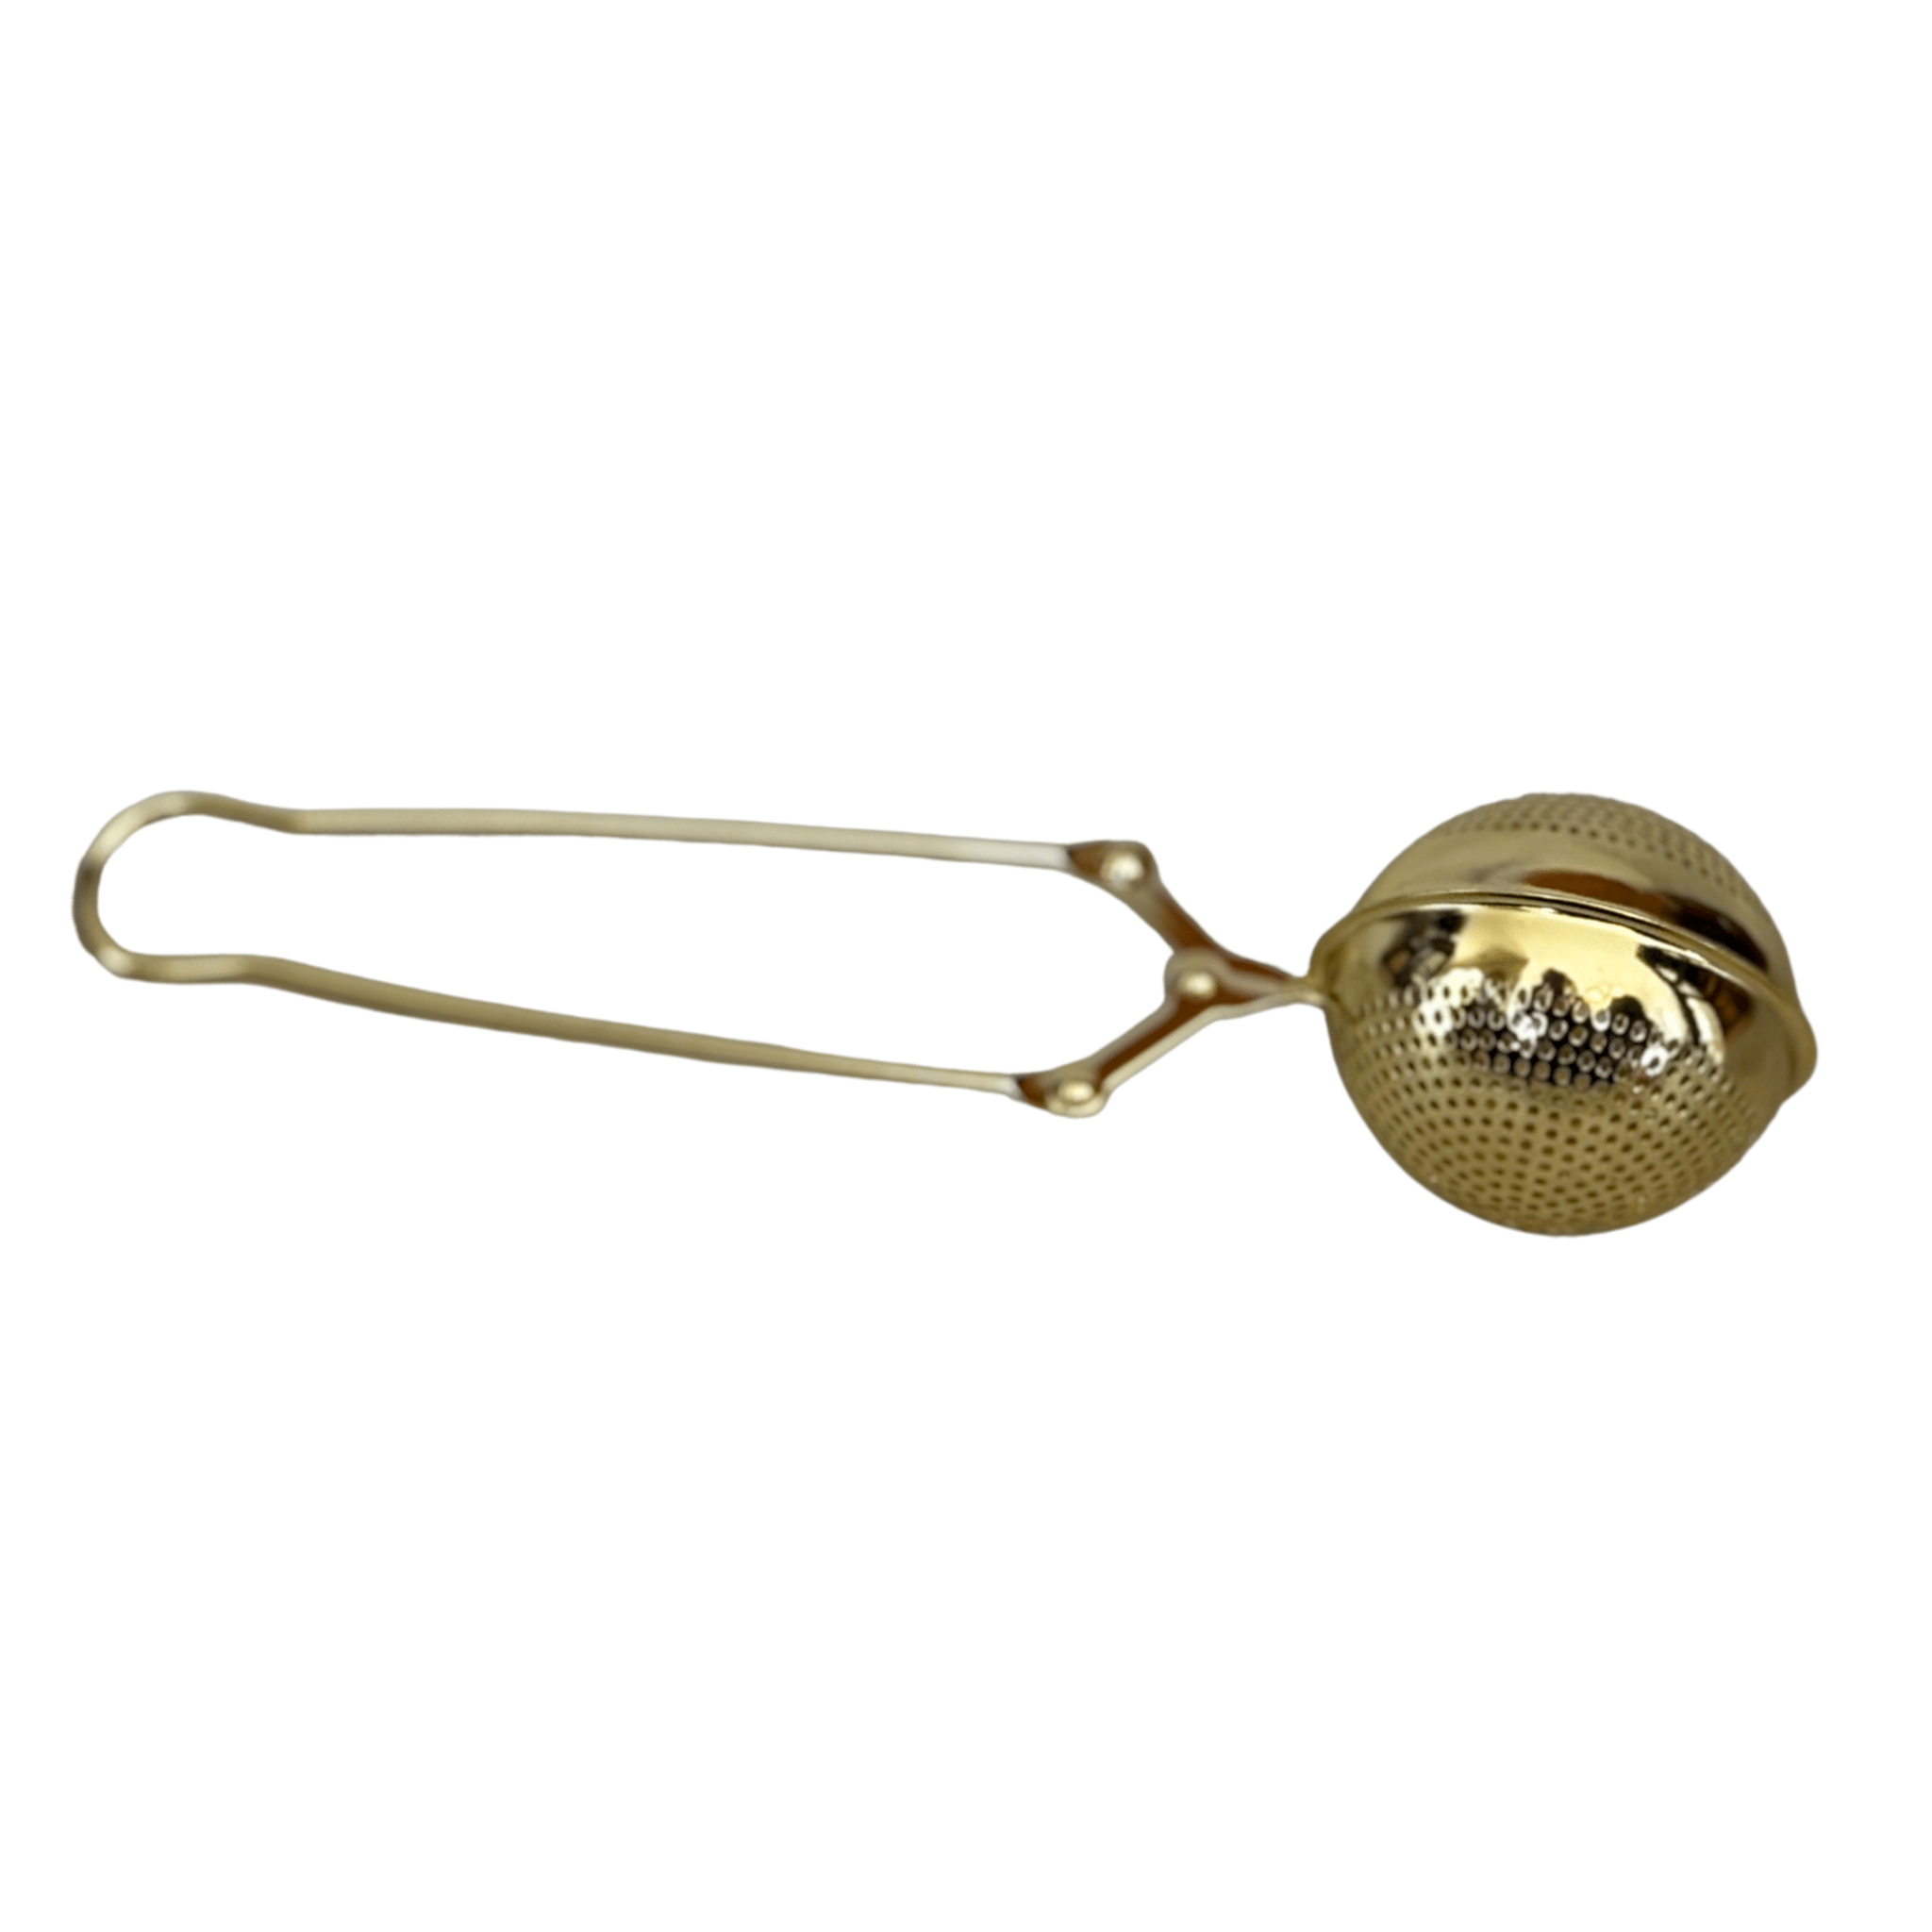 GOLD BALL TEA INFUSER W/HANDLE & CLAMP - PLUME & WILLOW